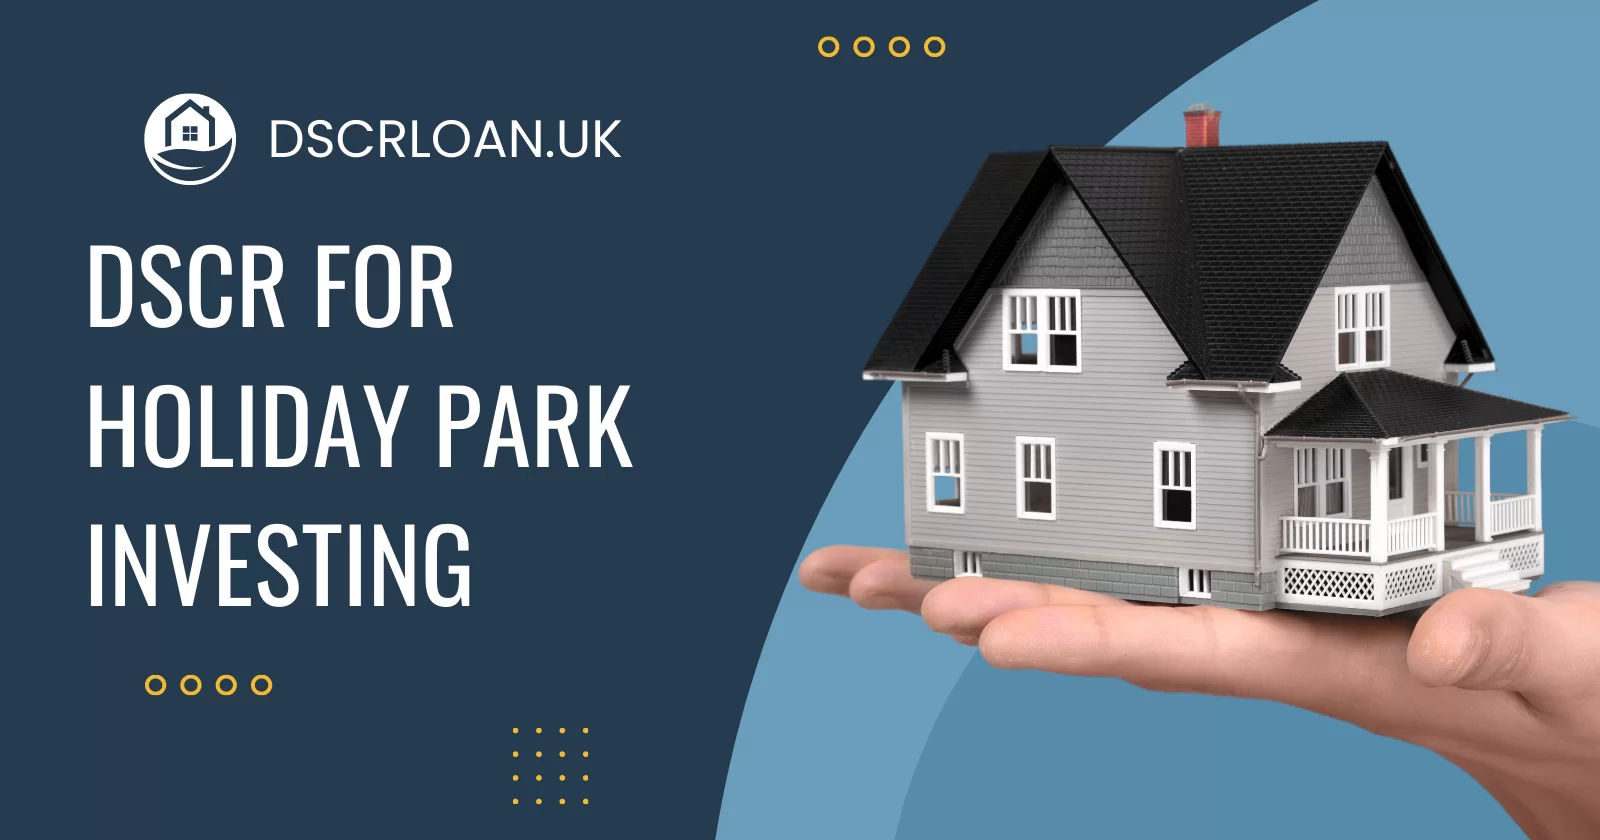 investing in holiday parks with dscr